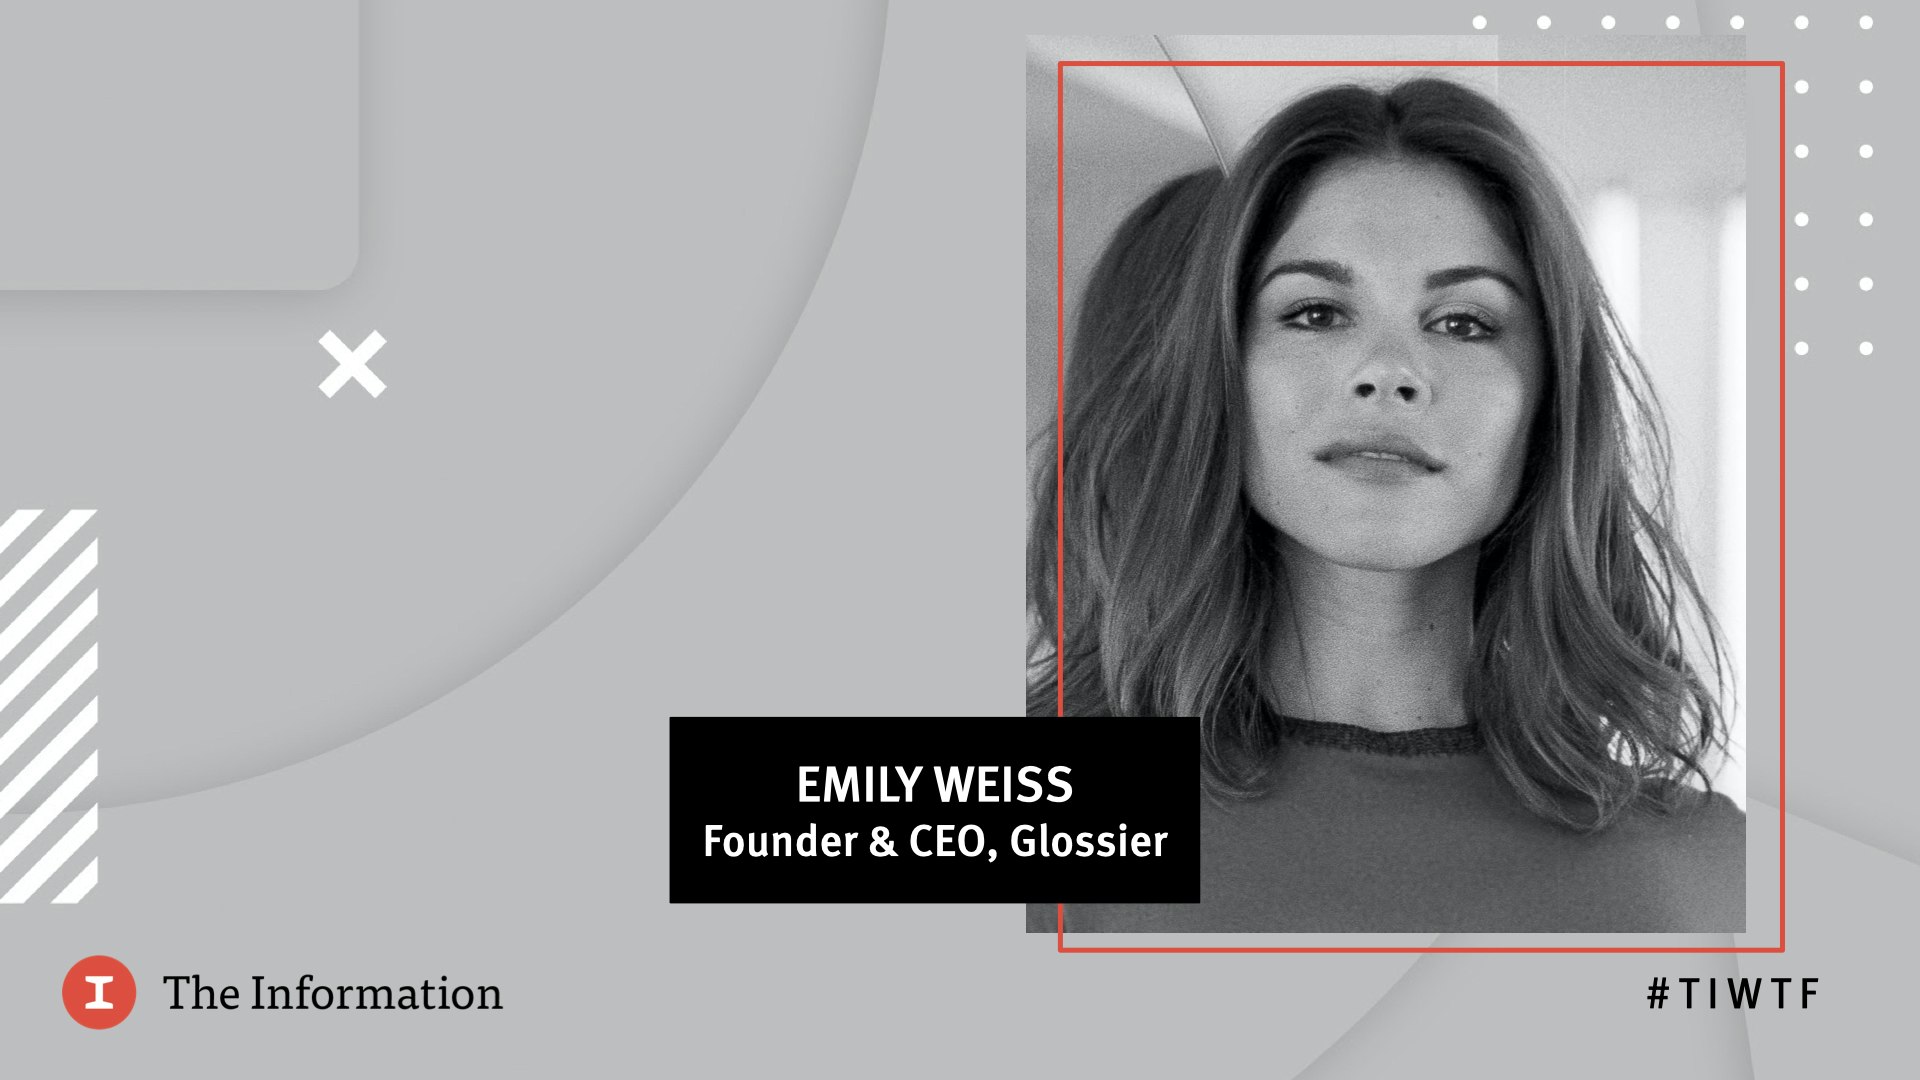 WTF 2020 - Glossier's Founder & CEO Emily Weiss in conversation with Jessica Lessin, Founder & CEO of The Information